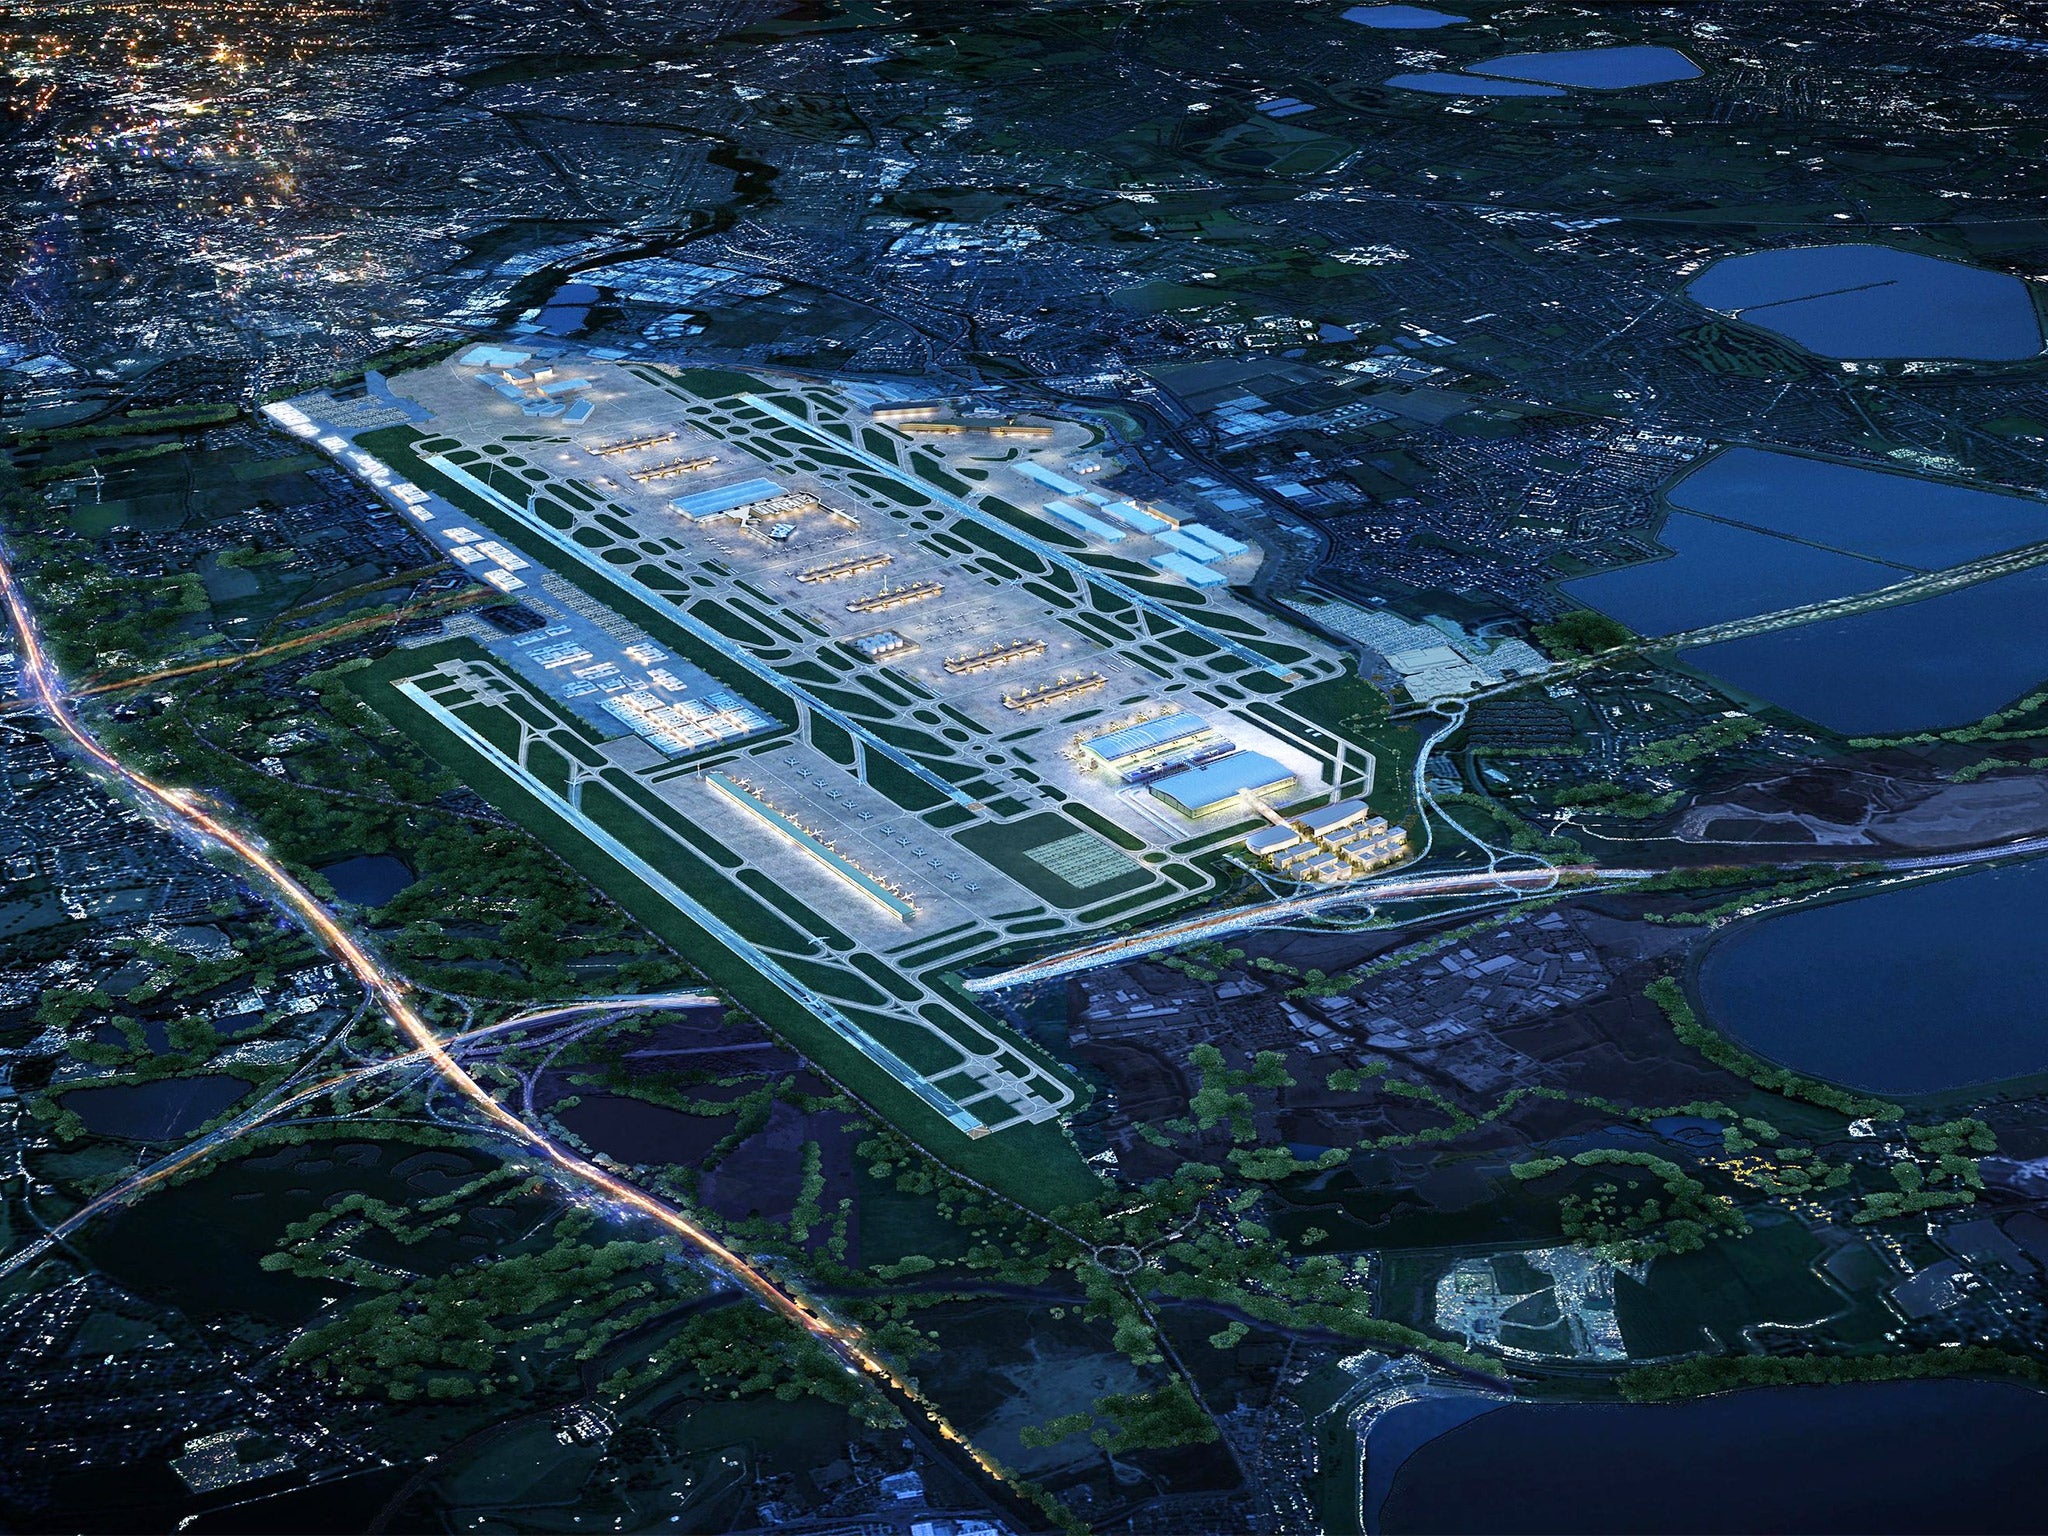 An artist's impression showing how Heathrow Airport could look with a third runway